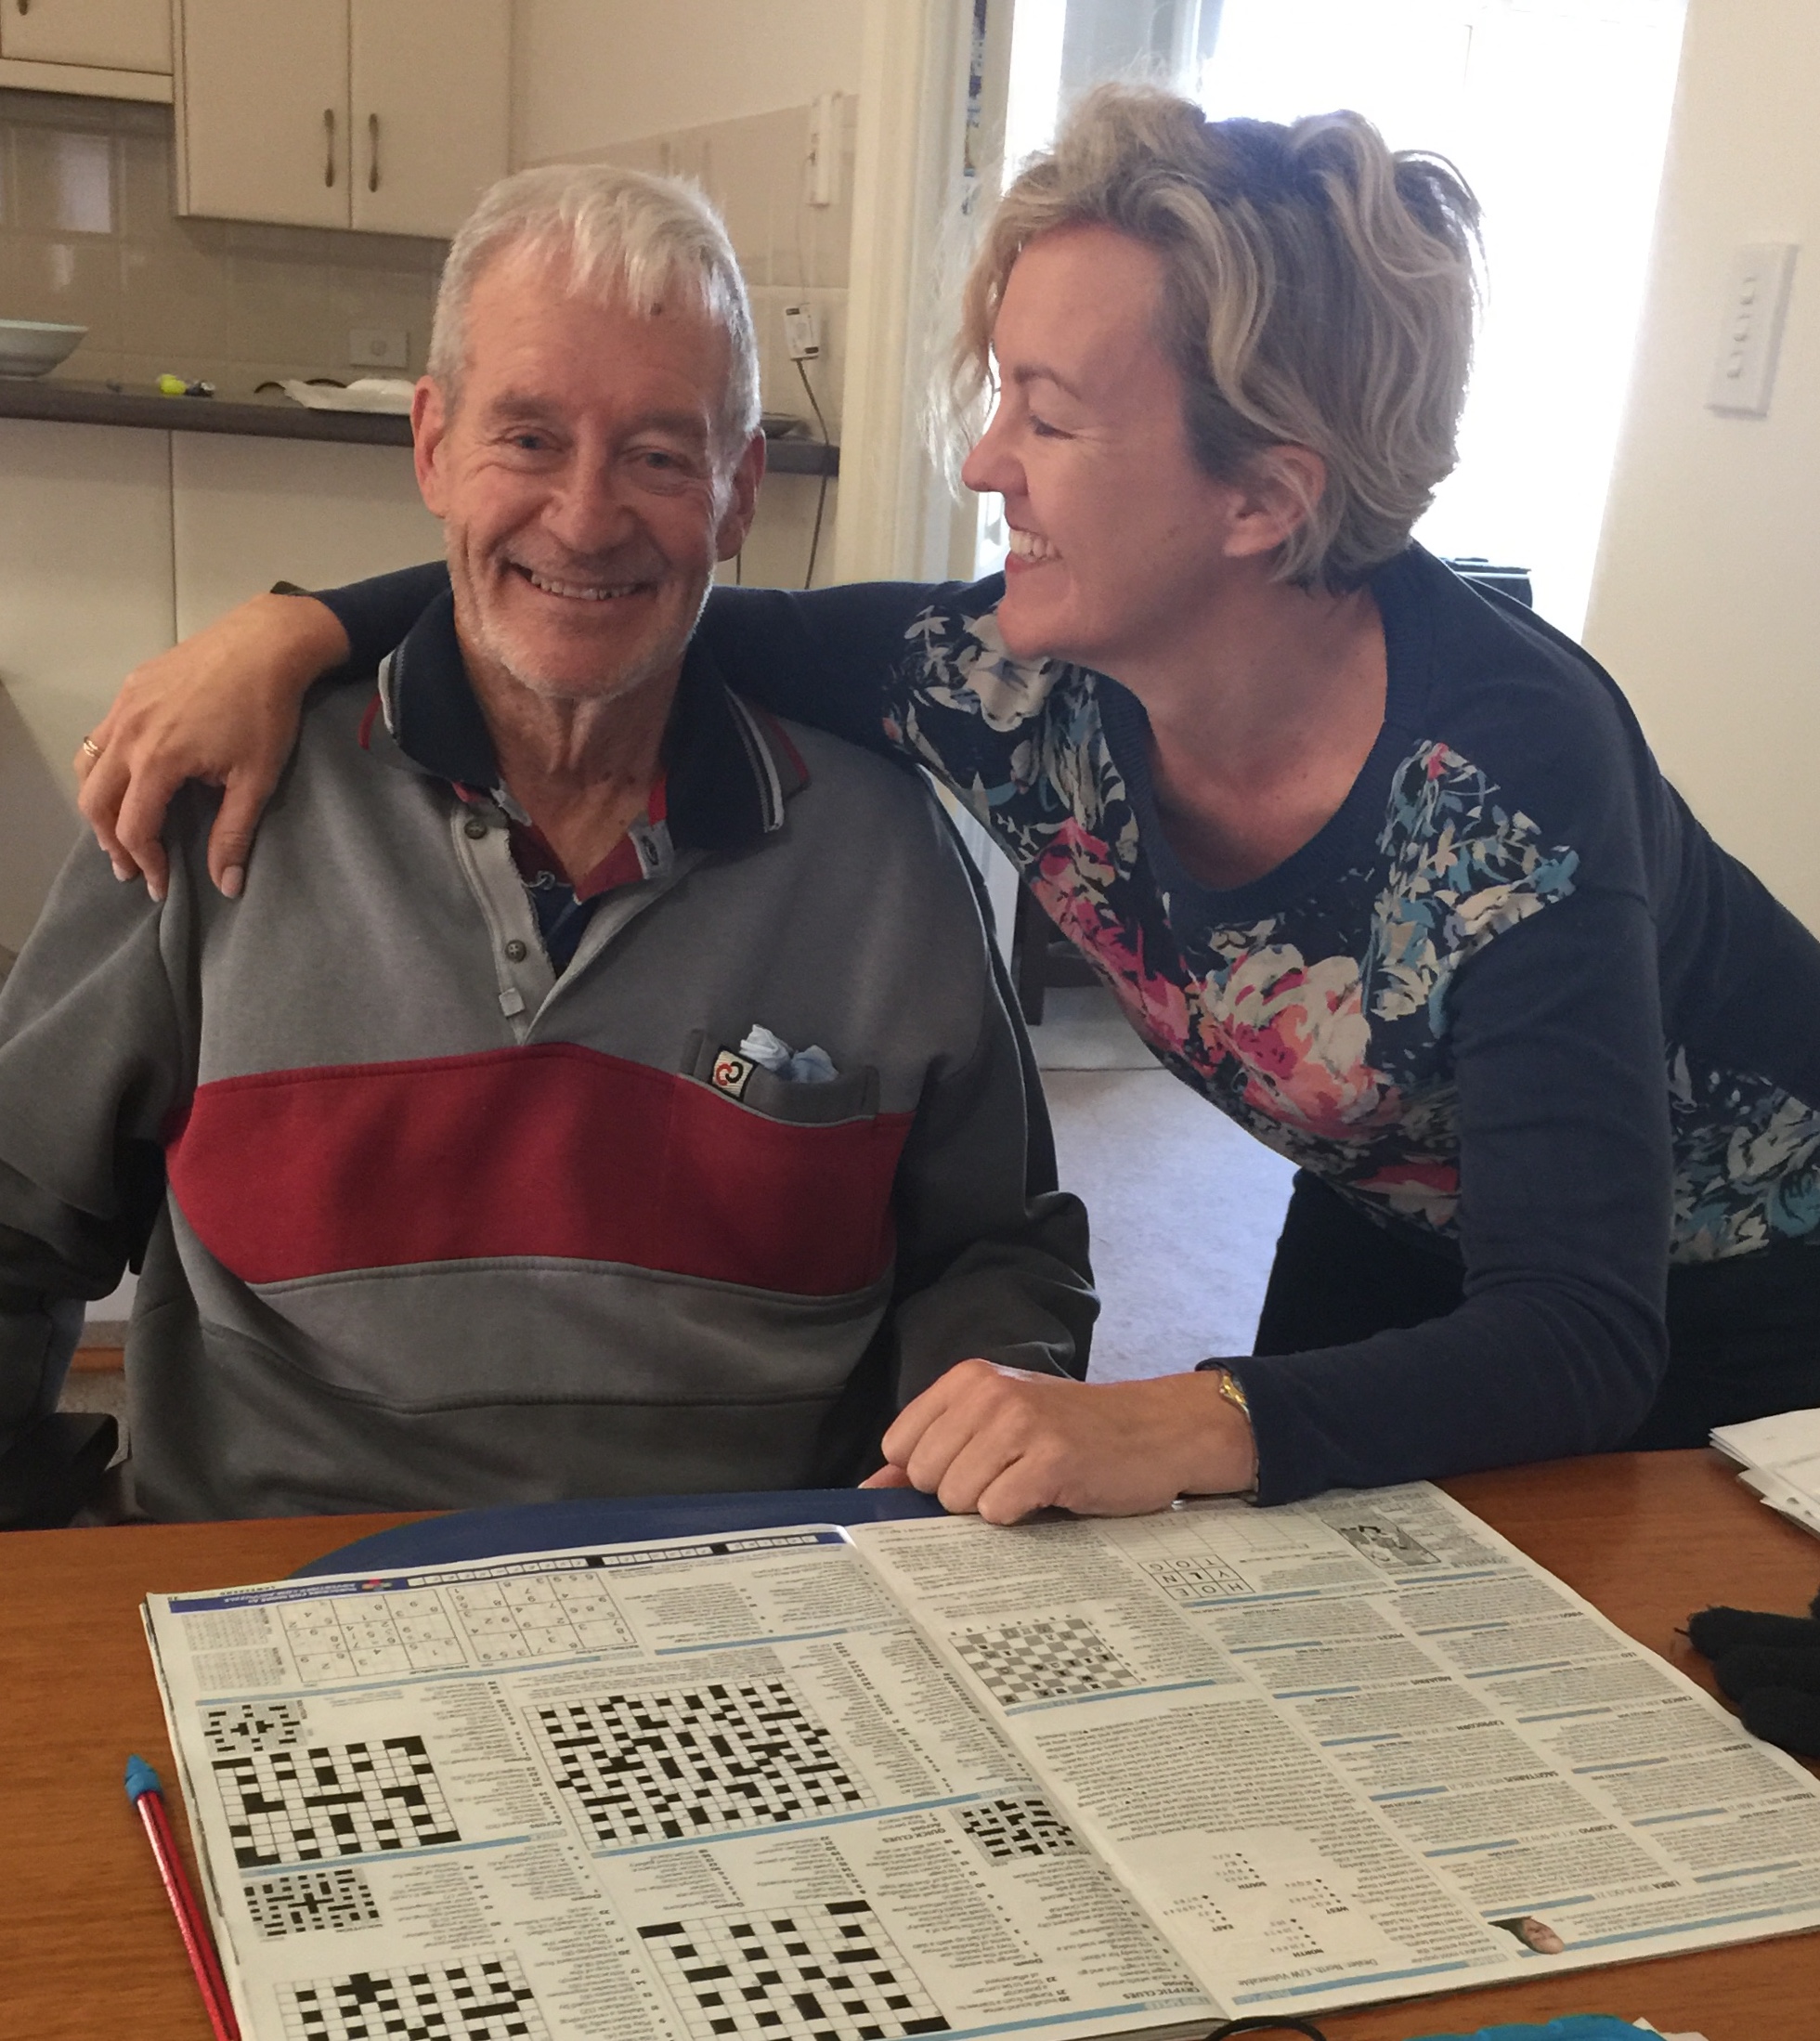 Smiling Older Father and Daughter doing Crossword Sudoku together